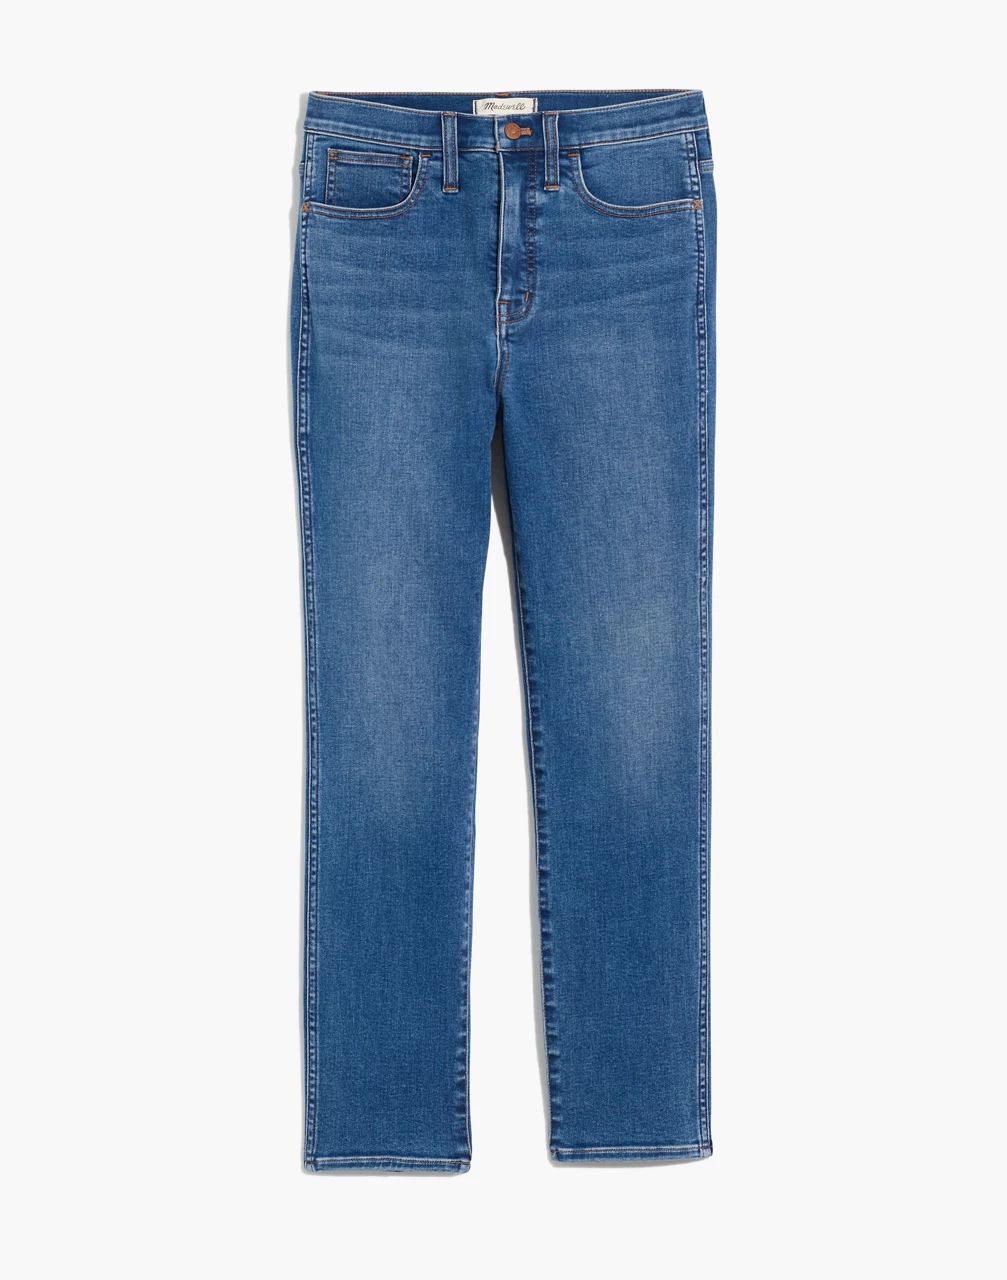 Authentic Stovepipe Jeans in Glynn Wash | Madewell